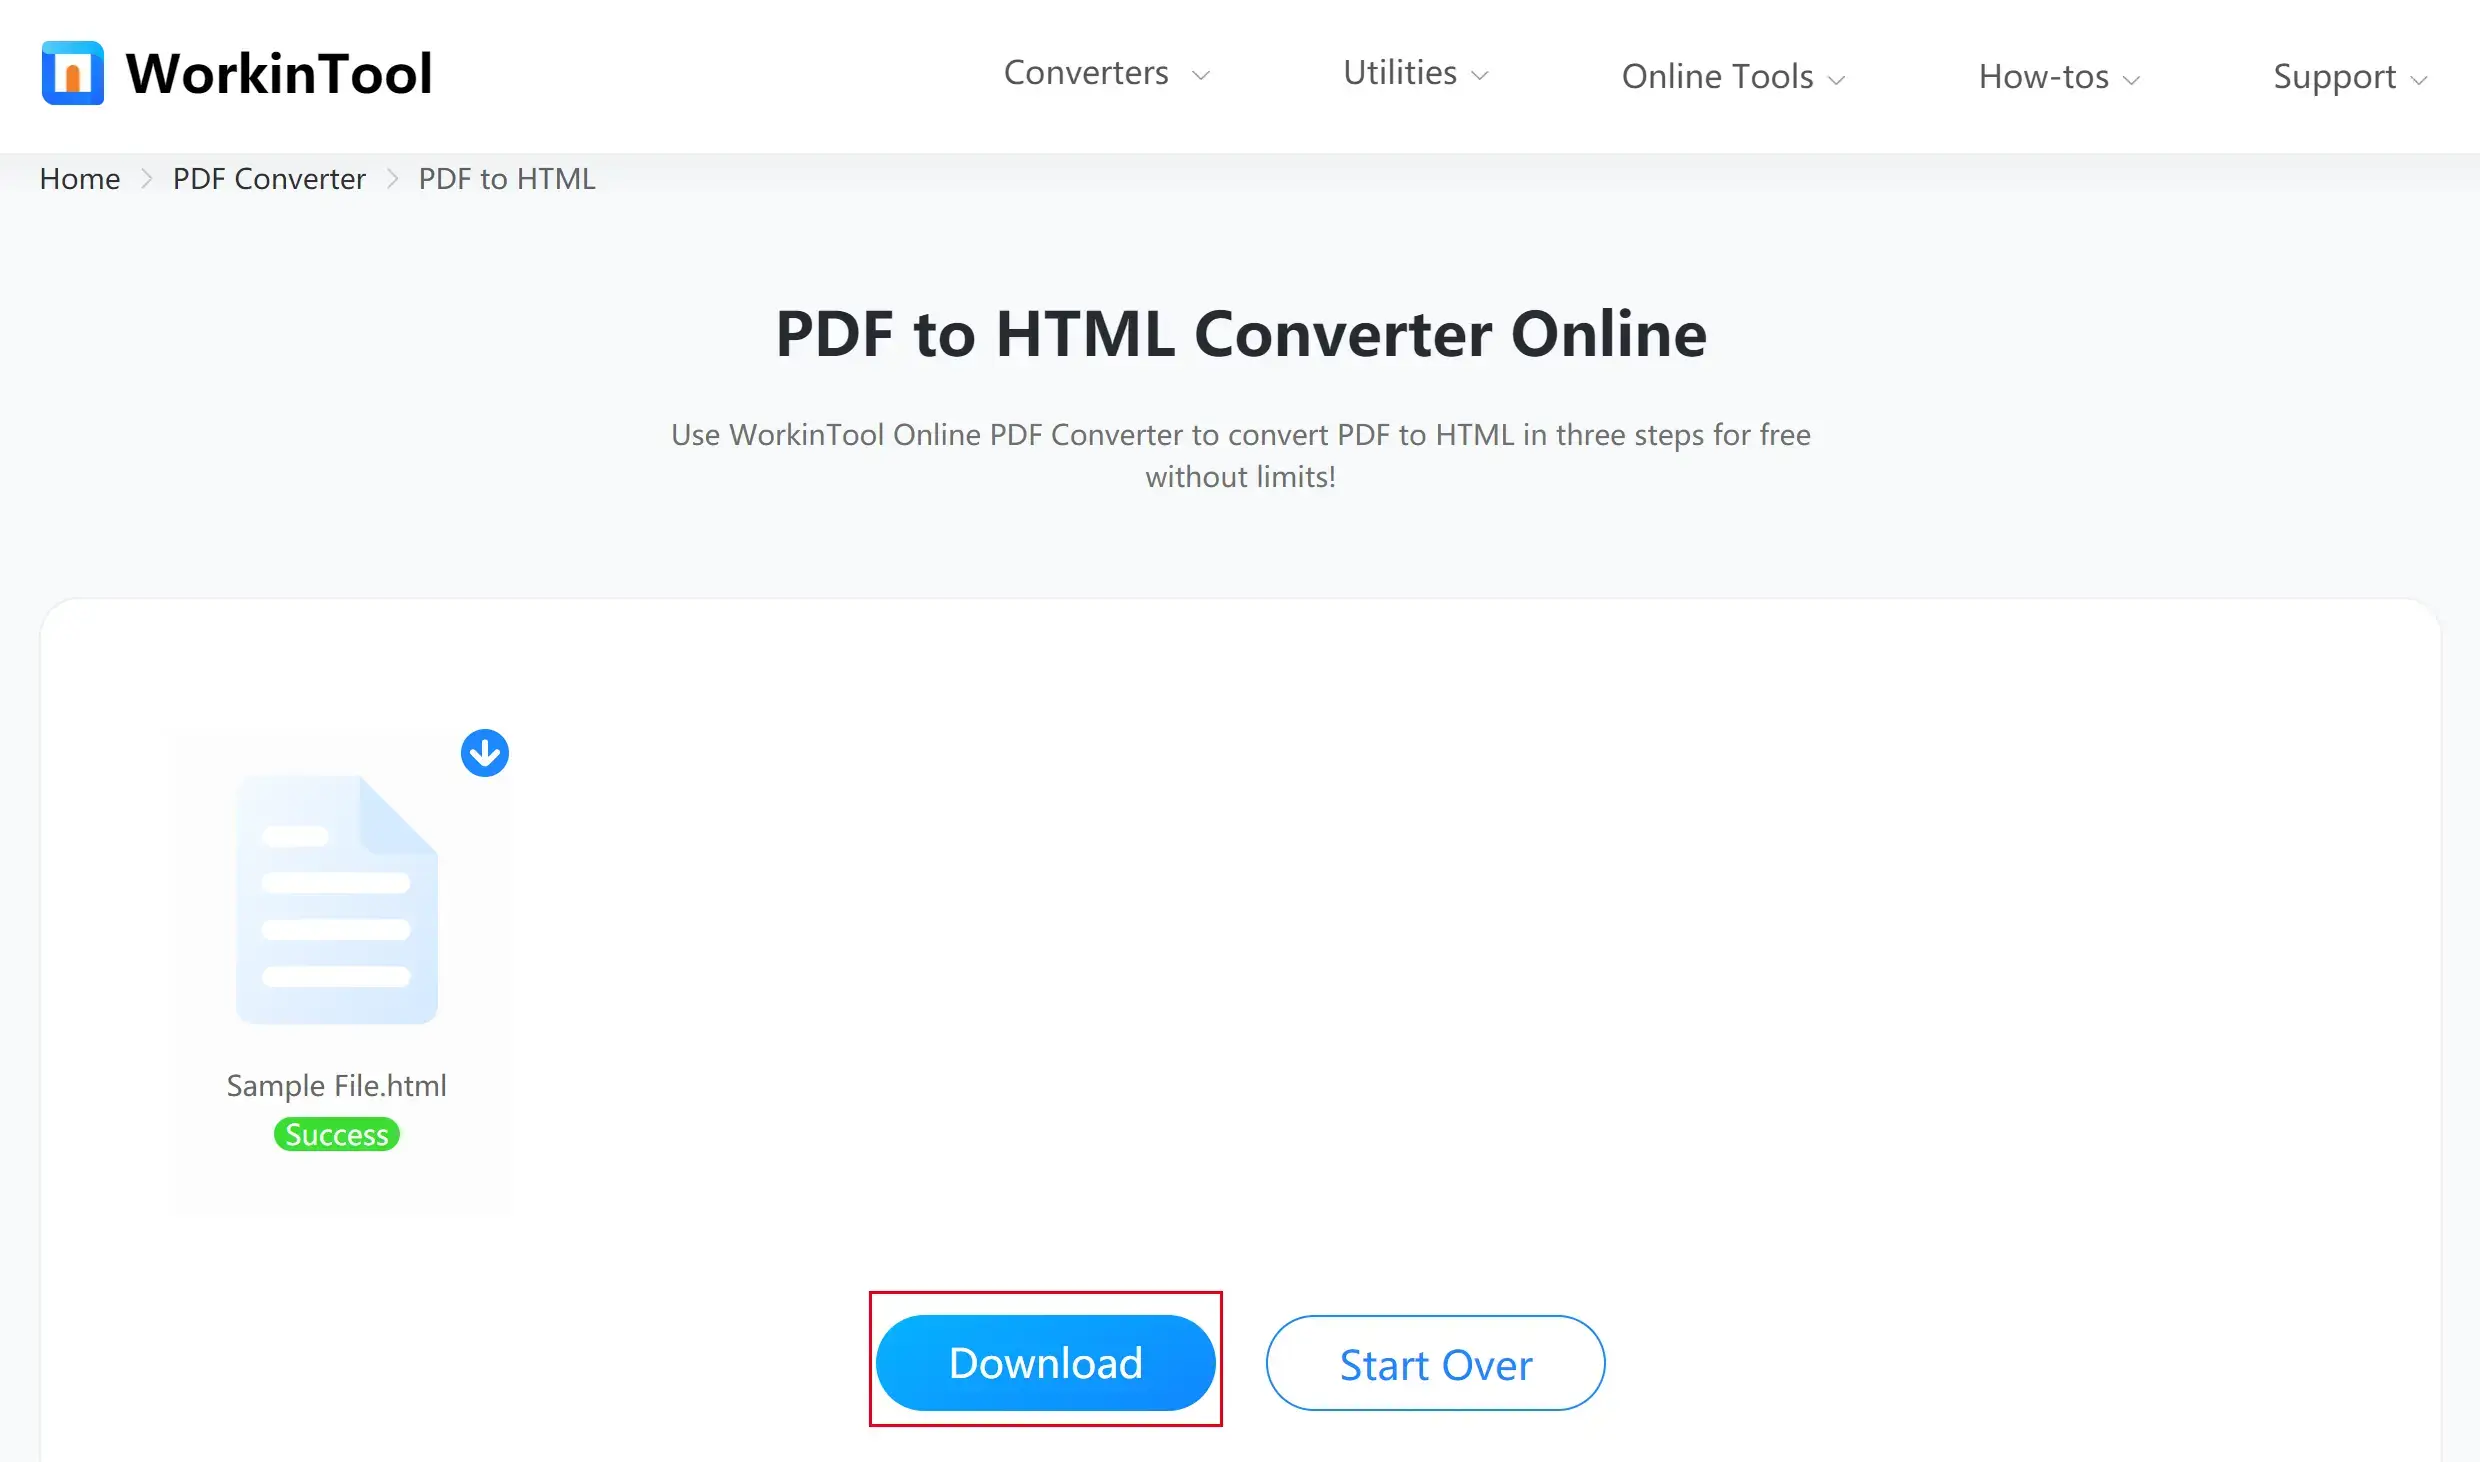 convert pdf to html in workintool online step 3